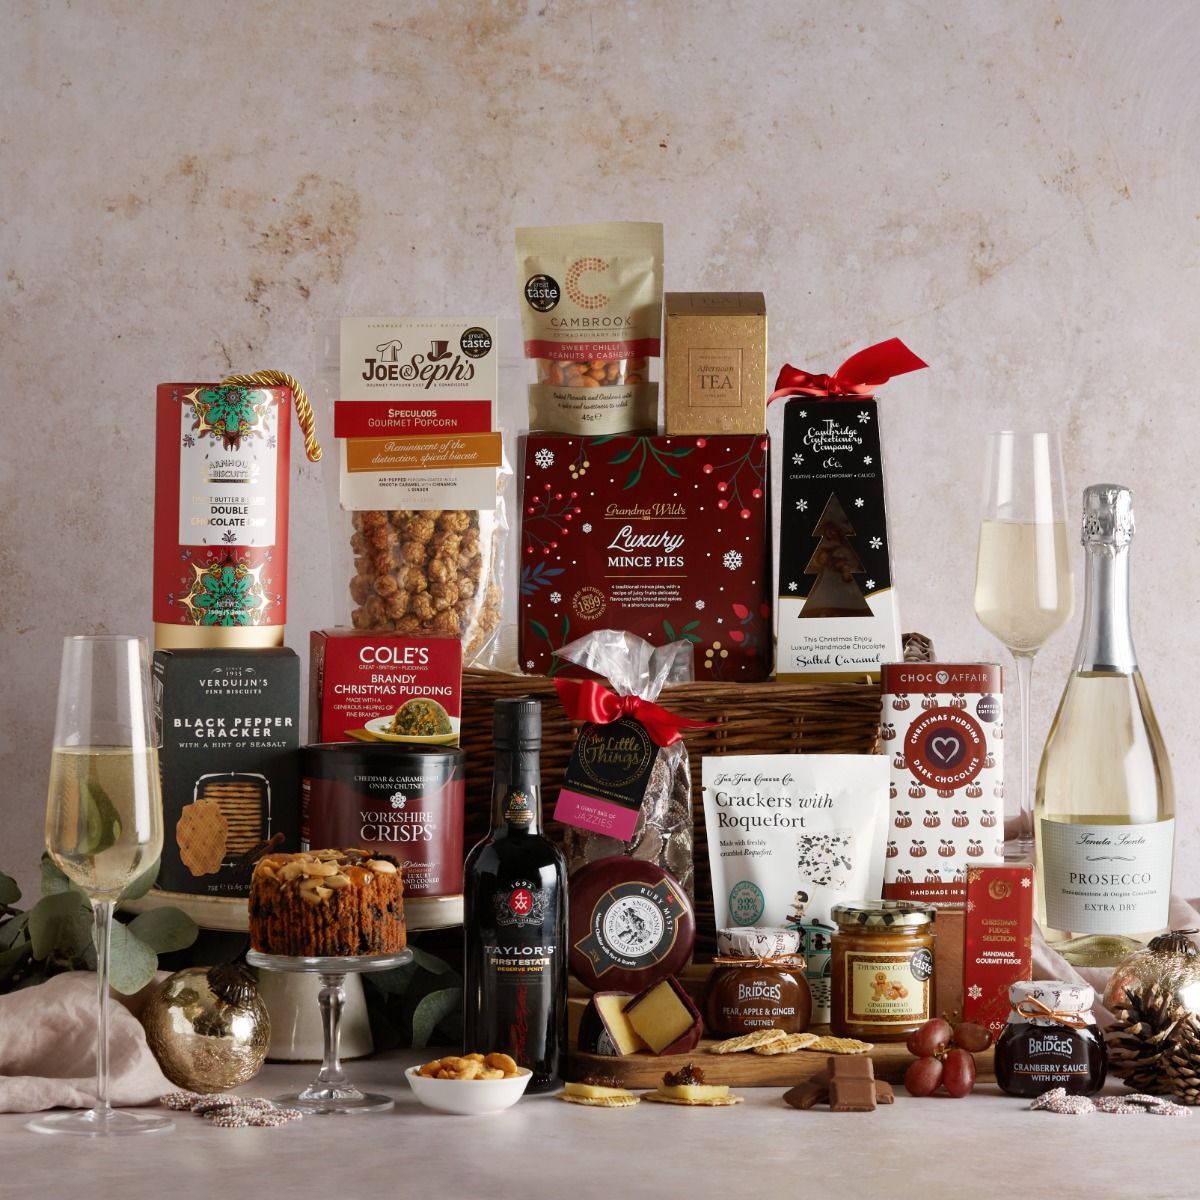 The Family Christmas Hamper with contents on display